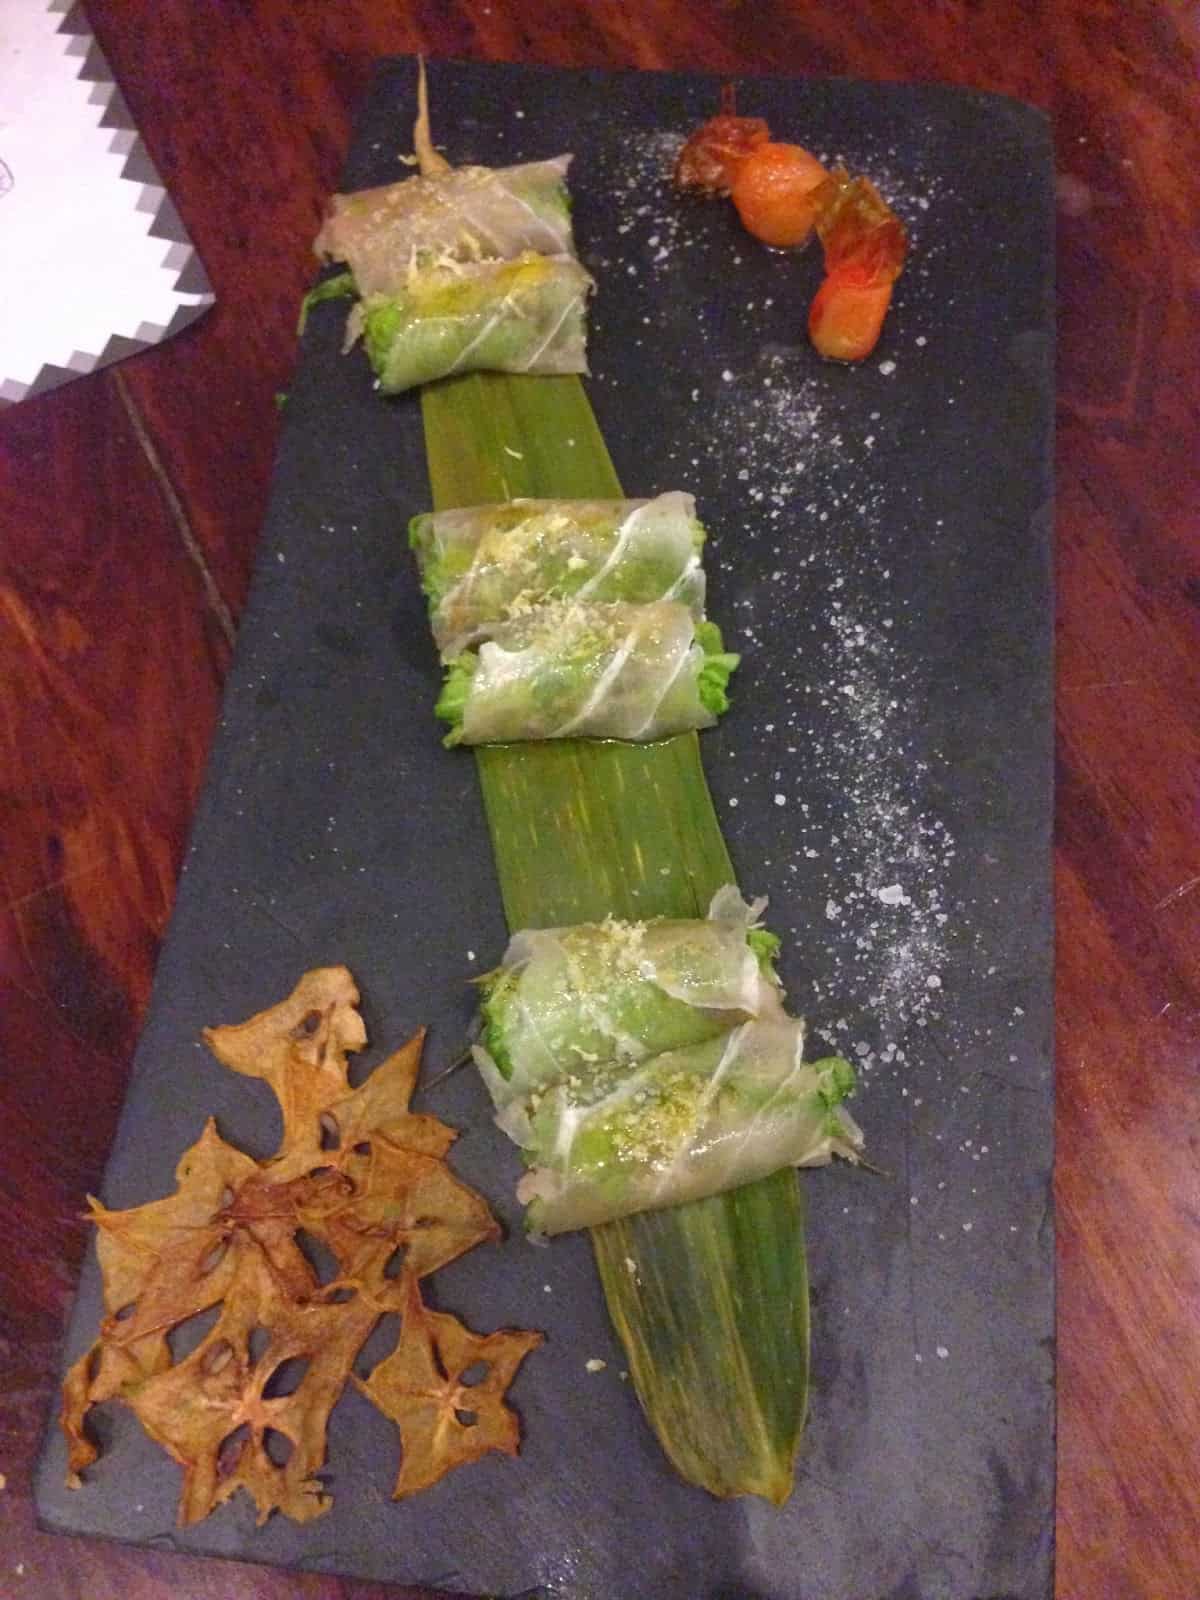 Salmon spring rolls at Manolo Caracol in Casco Viejo, Panama City